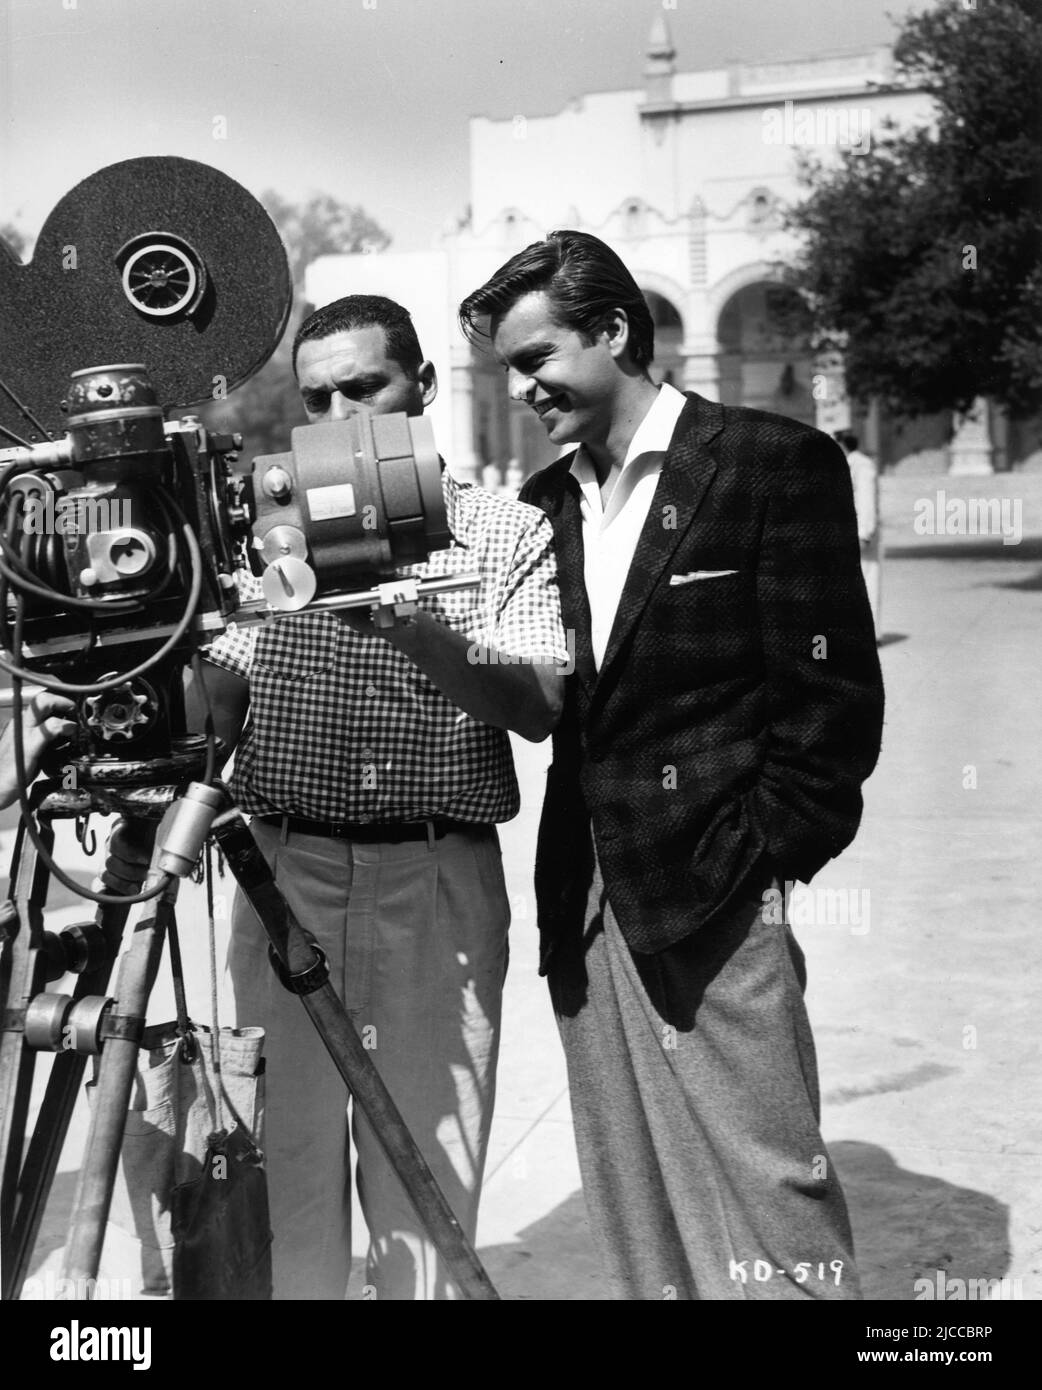 Cinematographer LUCIEN BALLARD and ROBERT WAGNER on set location candid in Arizona during filming of A KISS BEFORE DYING 1956 director GERD OSWALD novel Ira Levin Crown Productions / United Artists Stock Photo